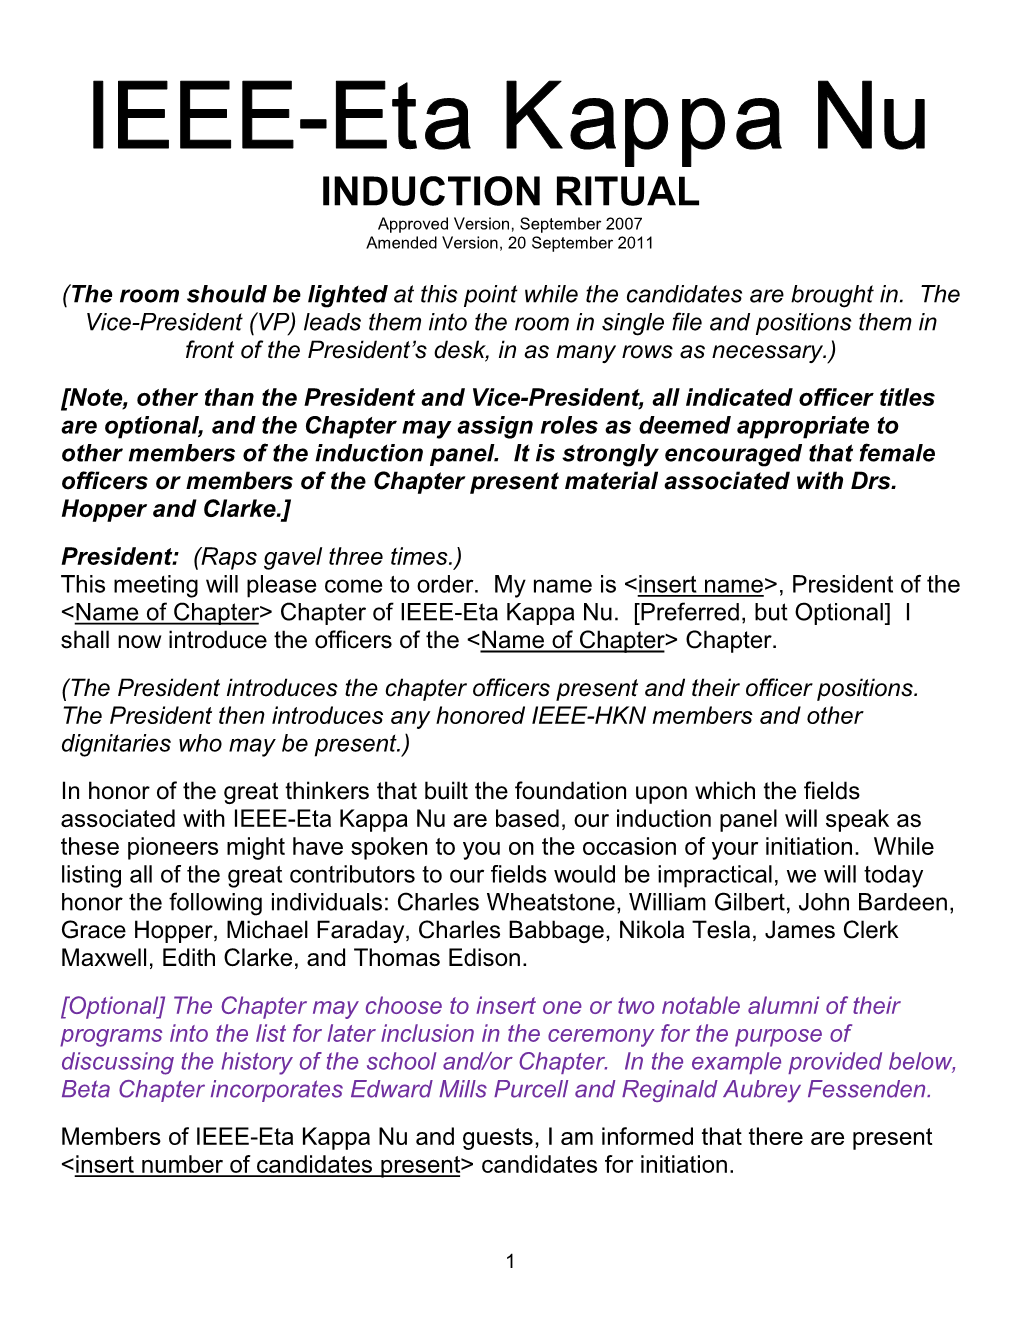 INDUCTION RITUAL Approved Version, September 2007 Amended Version, 20 September 2011